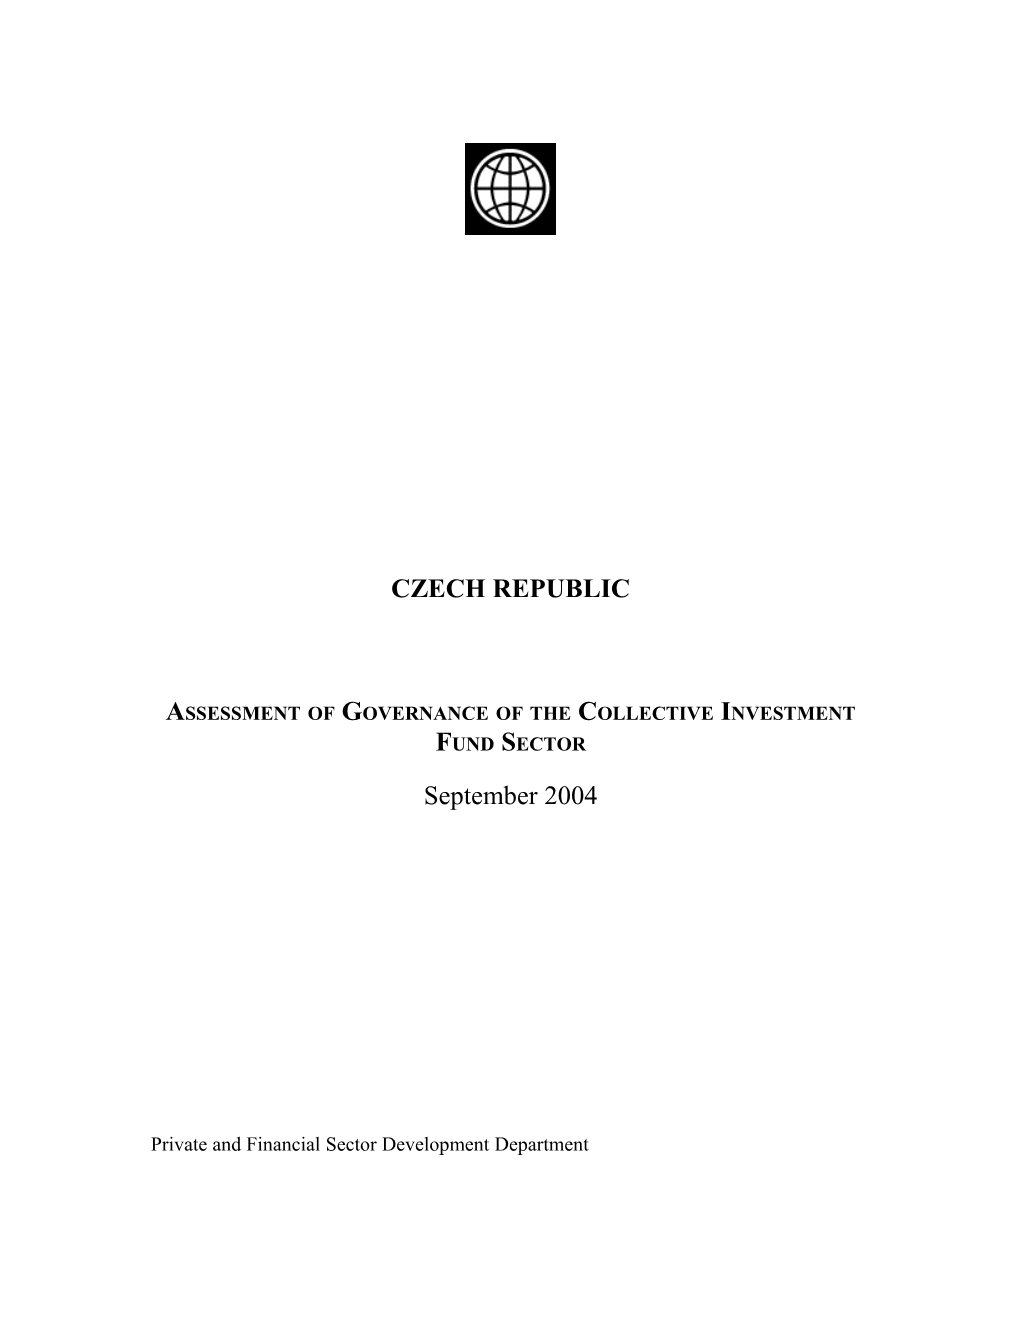 Assessment of Governance of the Collective Investment Fund Sector